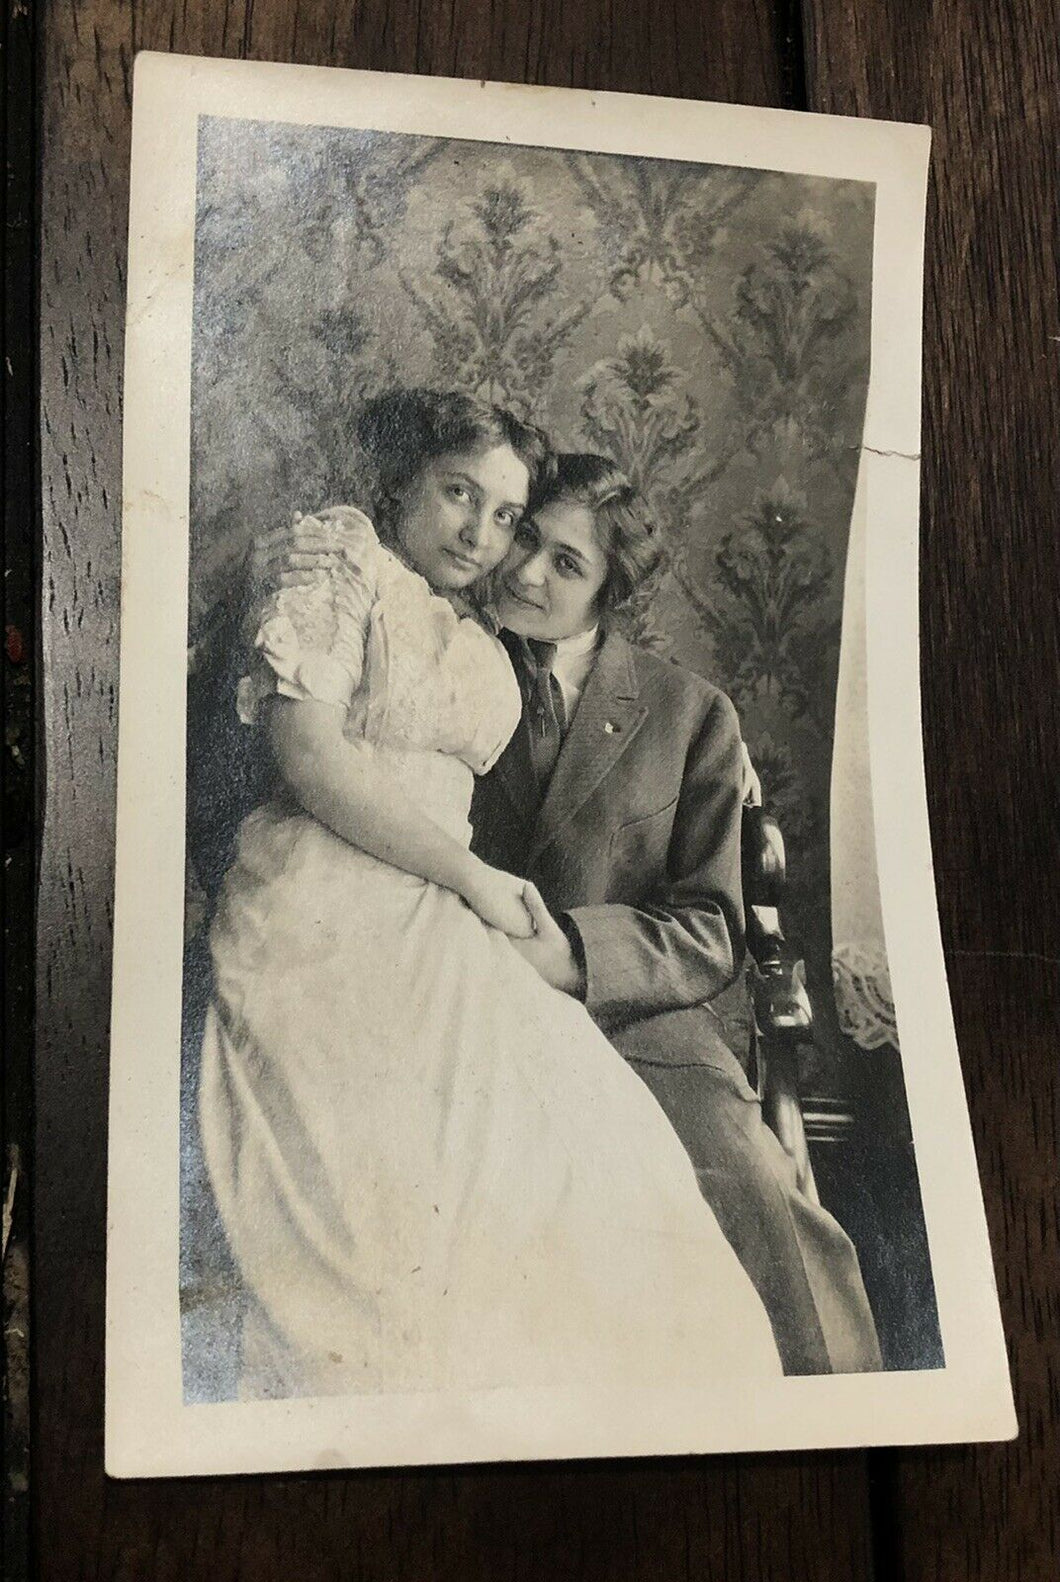 Affectionate Women Holding Hands, One Dressed as Man, 1920s Snapshot Photo